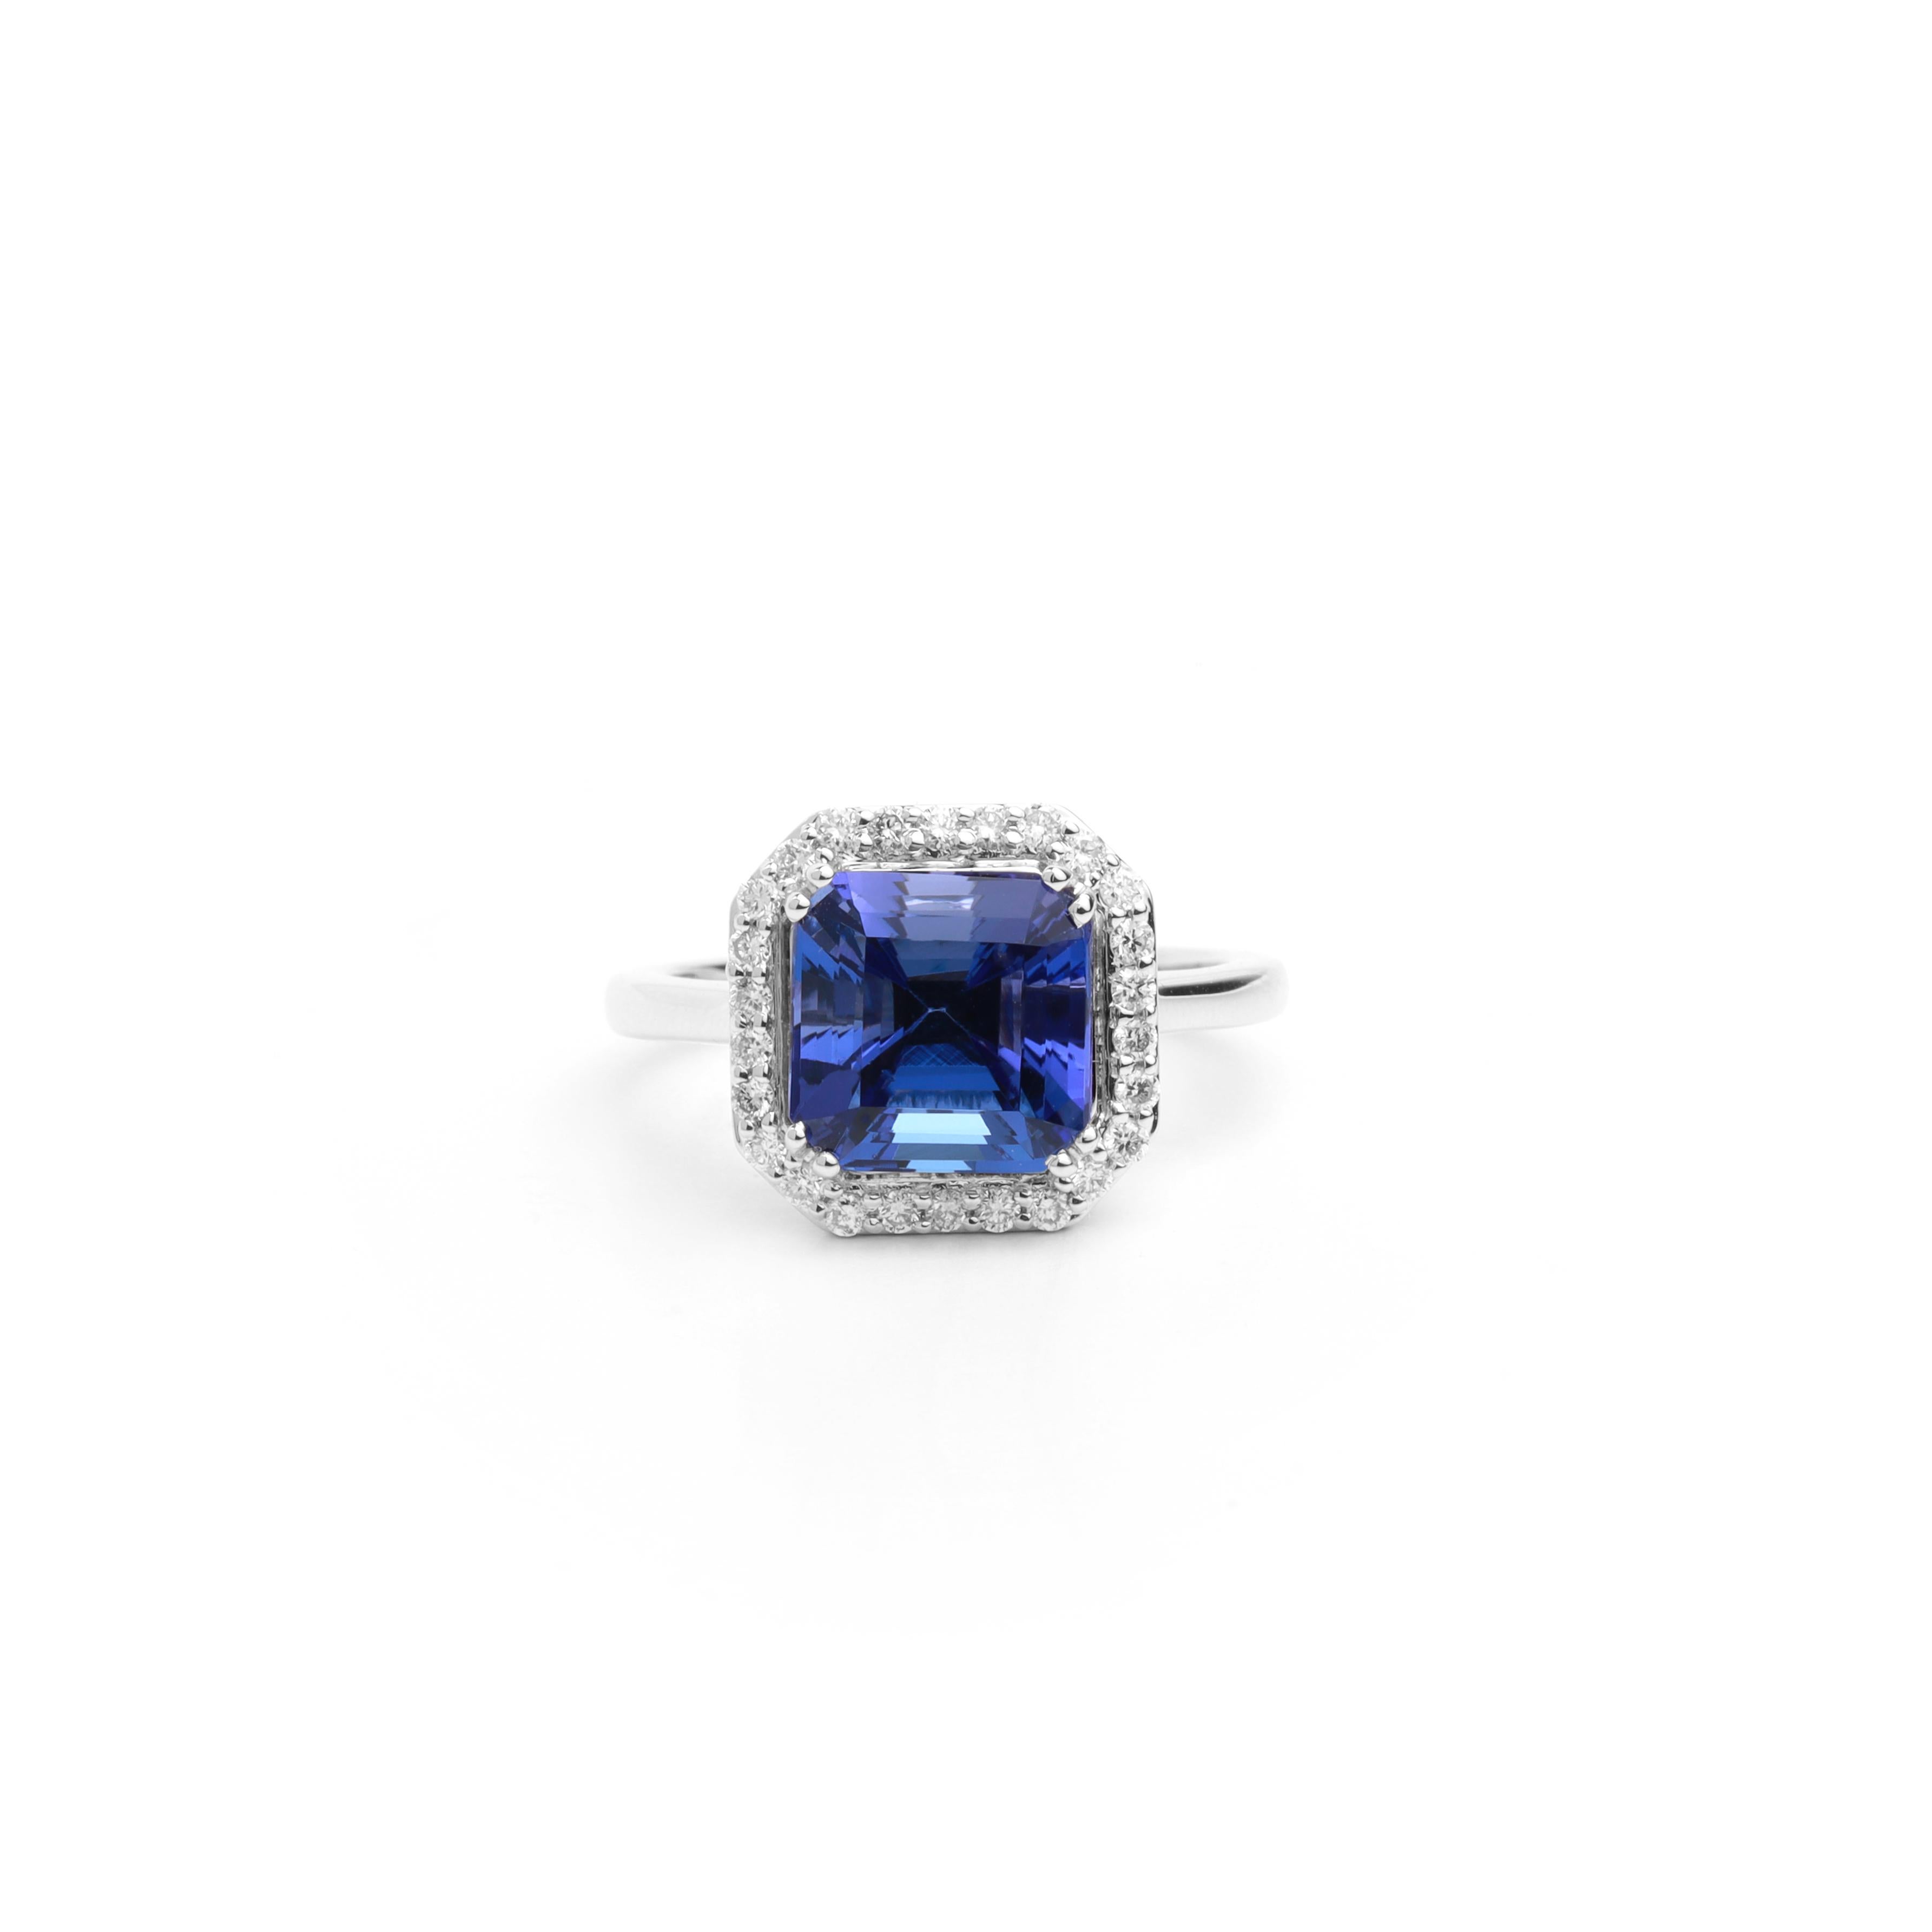 4.5 Carat Natural AAA Tanzanite Diamond Halo Cocktail Engagement Ring 18k Gold

Available in 18k white gold.

Same design can be made also with other custom gemstones per request.

Product details:

- Solid gold

- Diamond - approx. 1.3mm E VS

-